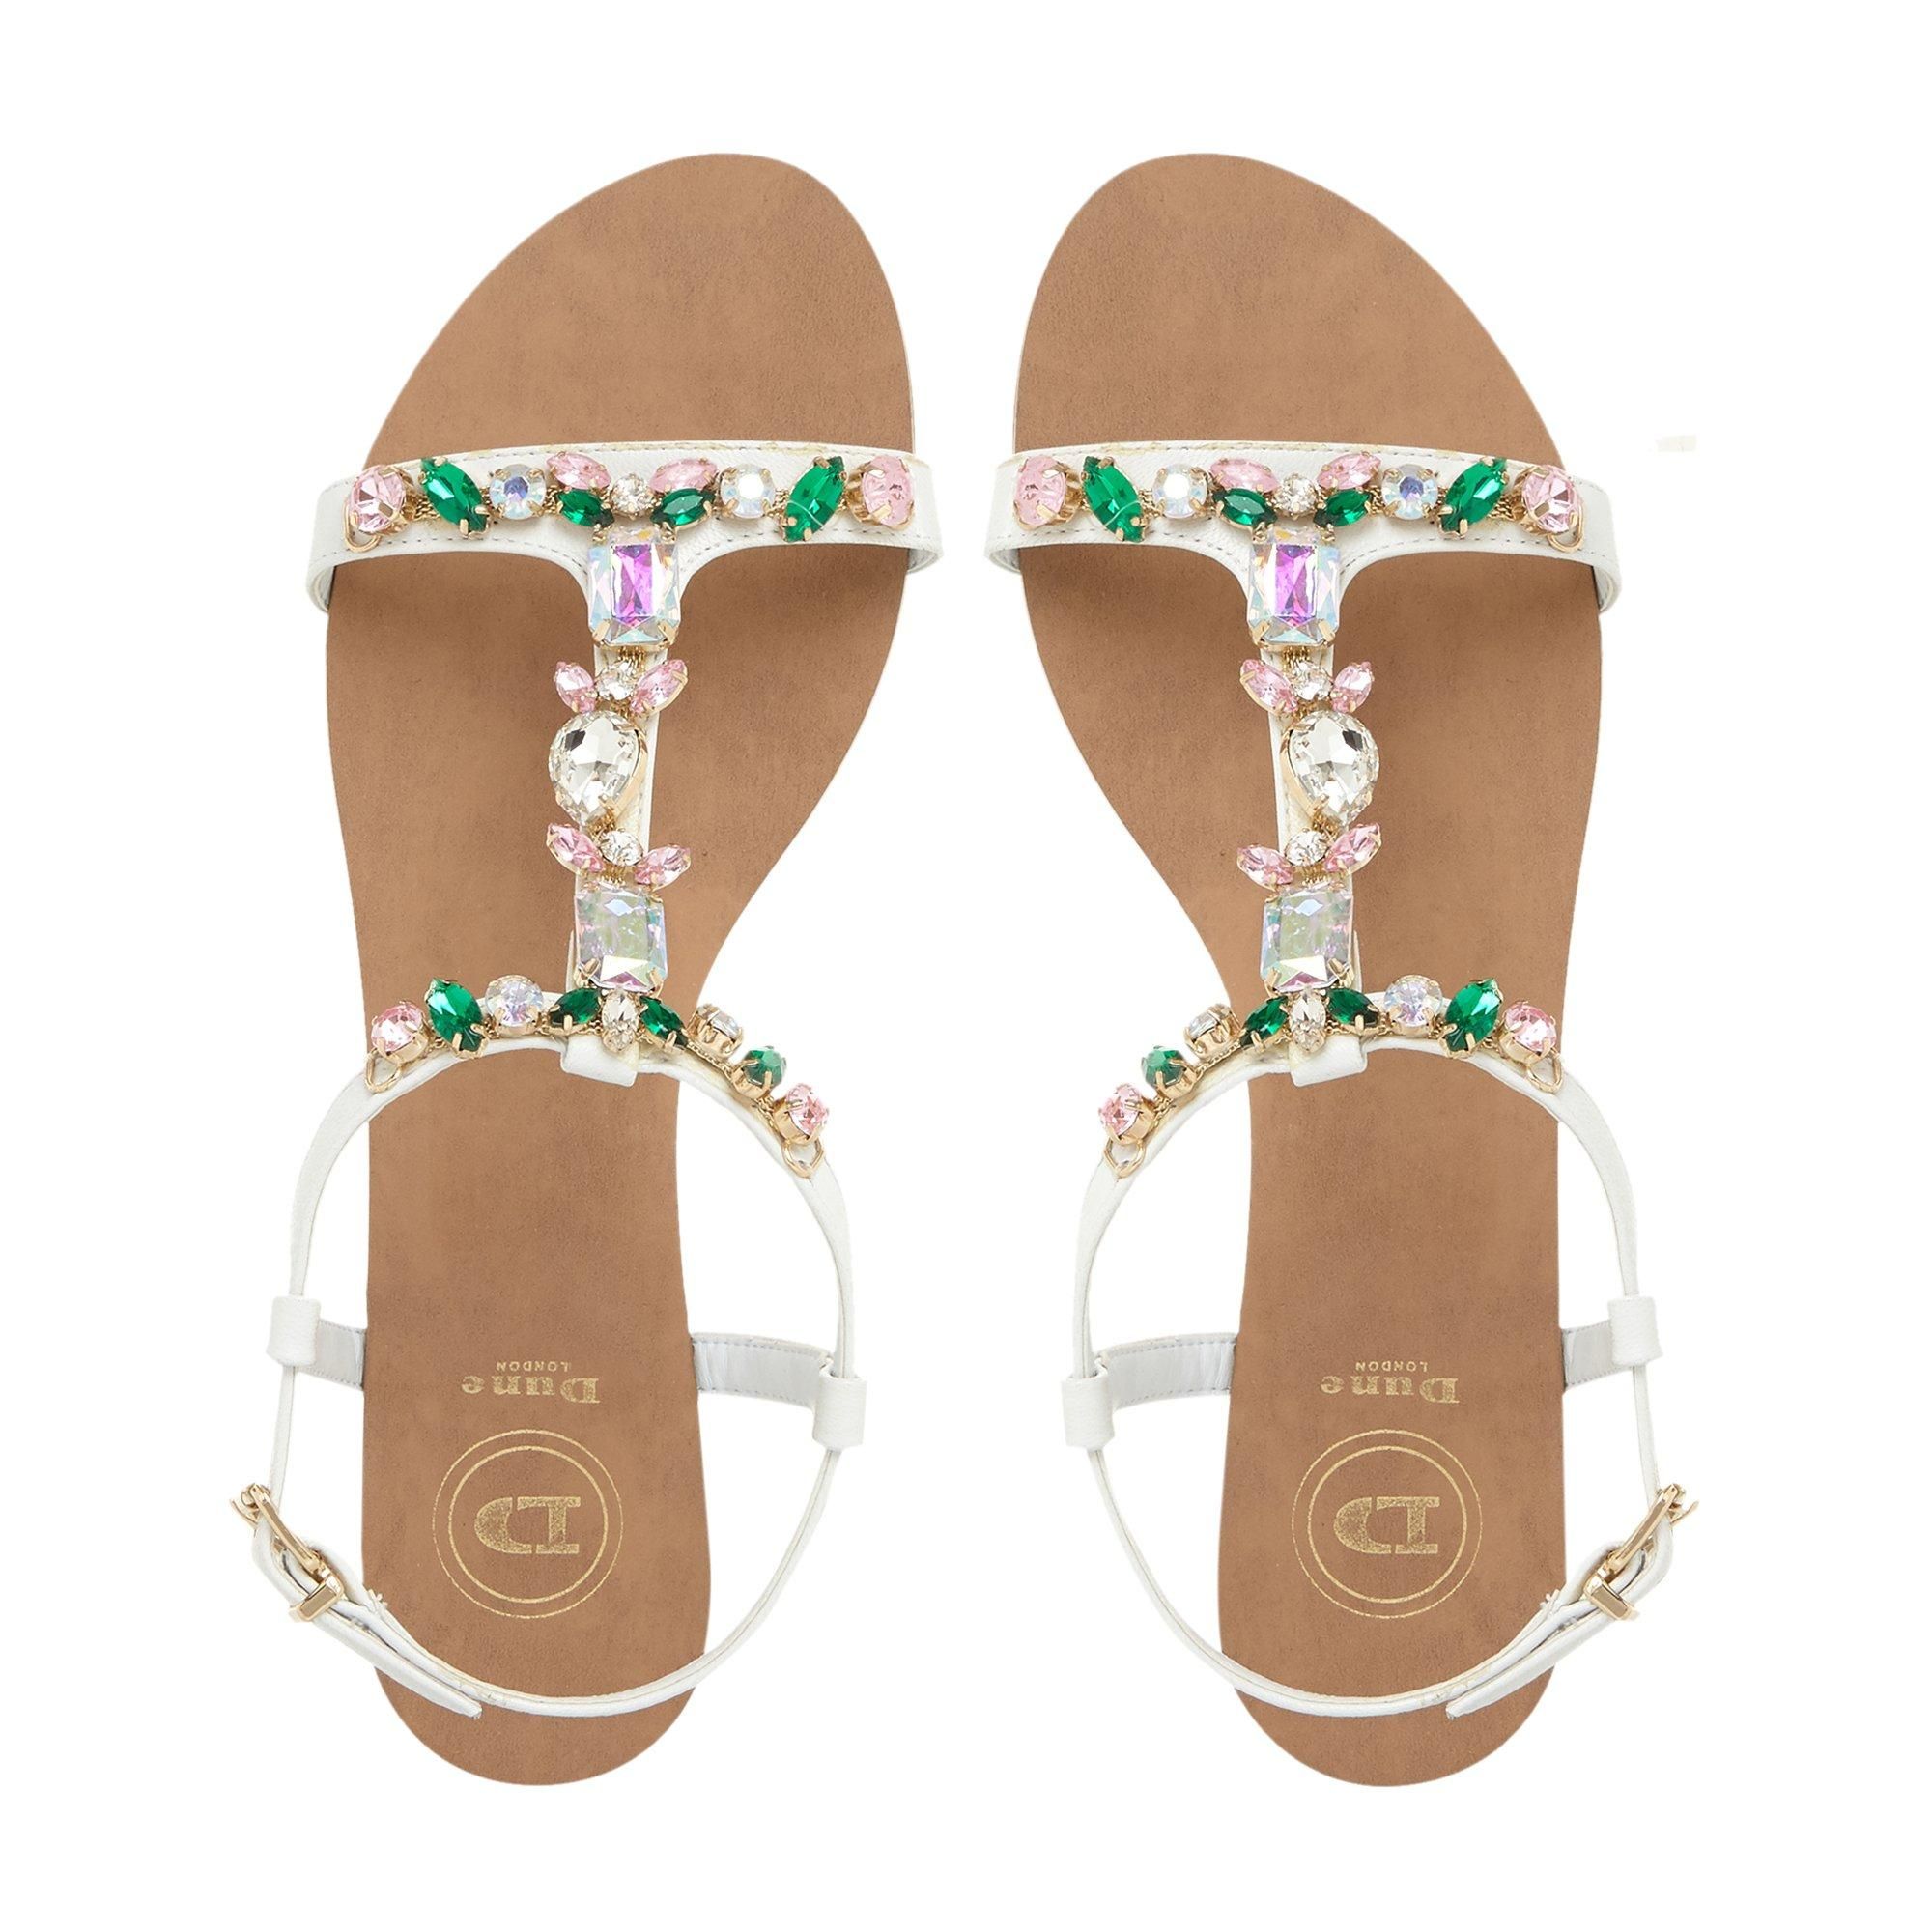 Complete your summer edits with the versatile Natally sandal by Dune. Secured with a gold-toned buckle fastening, it sits on a low block heel. The exquisite stone accents add a sparkling finish and a hint of glamour.